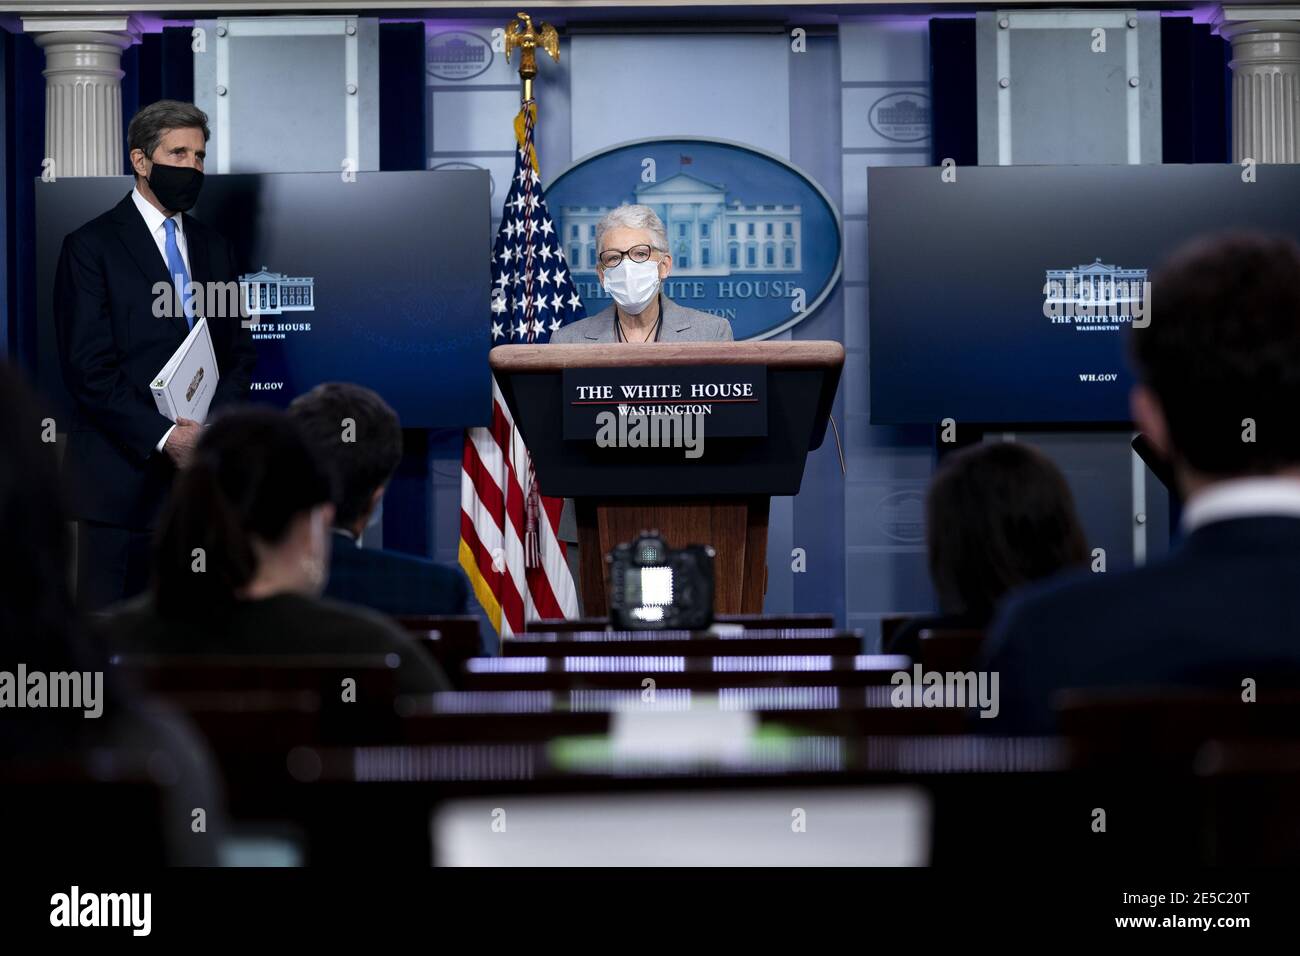 Washington, United States. 27th Jan, 2021. Gina McCarthy, National Climate Advisor, joined by John Kerry, Special Presidential Envoy for Climate, speaks during a news conference in the James S. Brady Press Briefing Room at the White House in Washington, DC, U.S., on Wednesday, Jan. 27, 2021. U.S. President Joe Biden will take executive action on Wednesday to combat climate change, including temporarily blocking new leases for oil drilling on federal lands, ordering a review of fossil-fuel subsidies and other measures to overhaul the U.S. energy mix. Credit: UPI/Alamy Live News Stock Photo